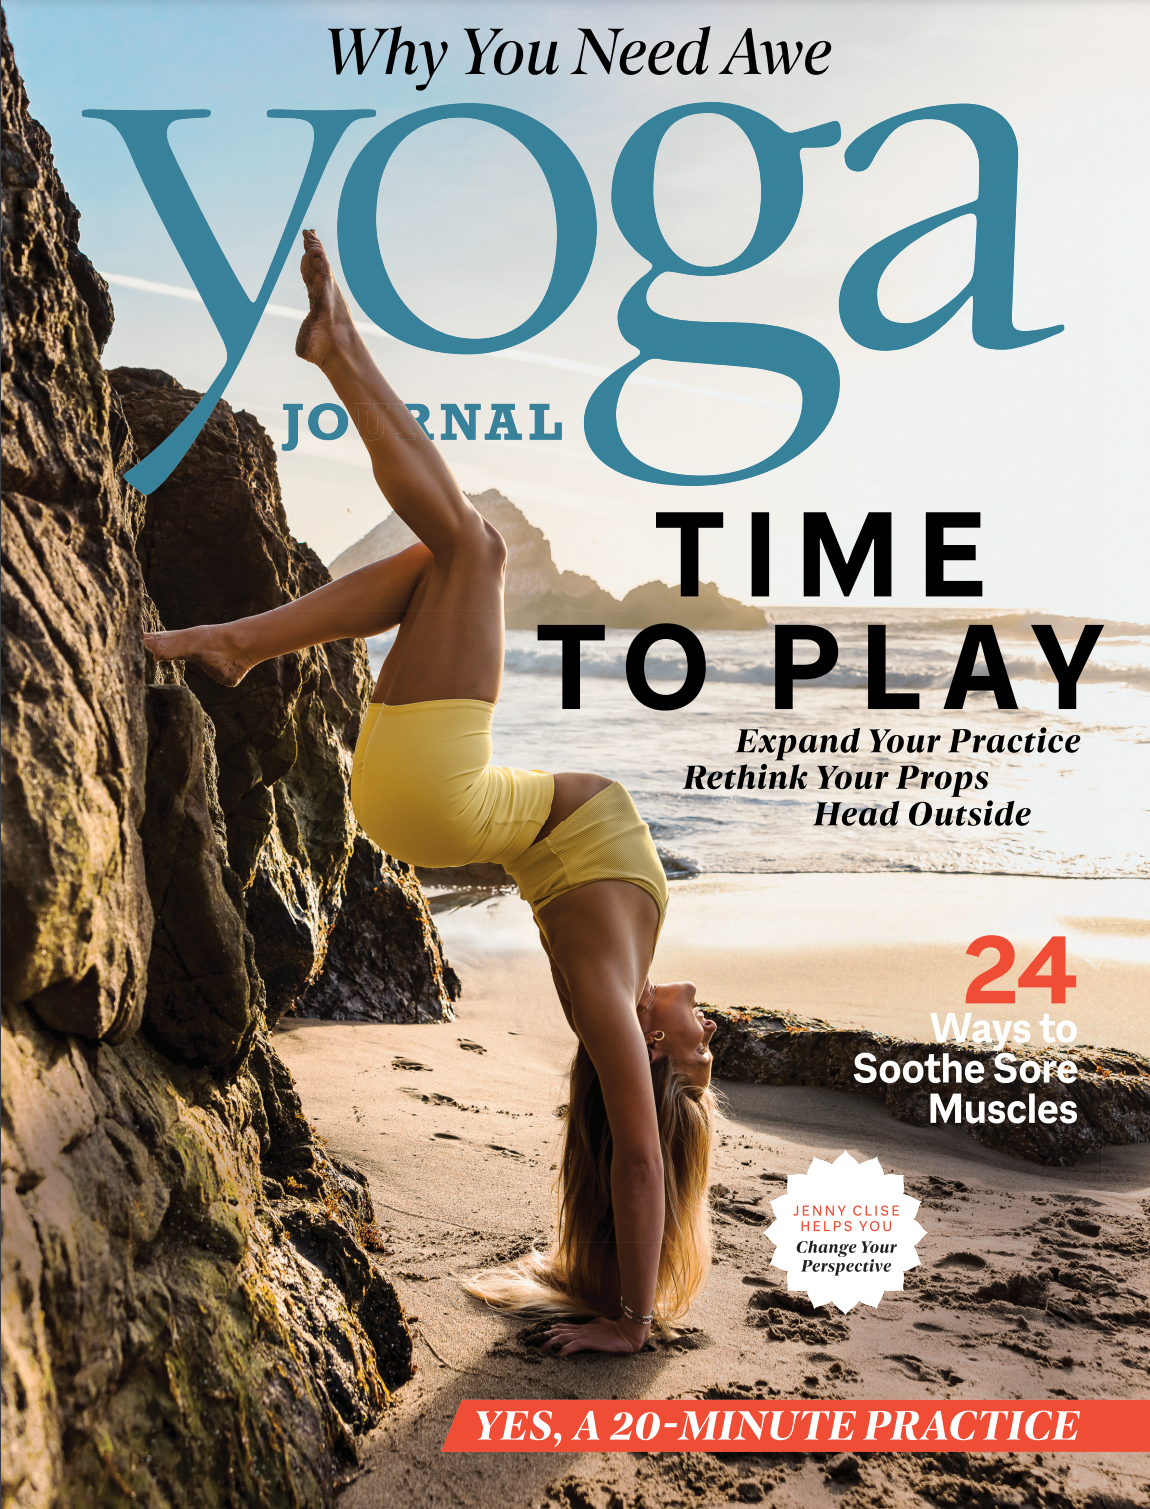 YOGA JOURNAL Your Guide To LESS STRESS Magazine **+ FREE GIFT++